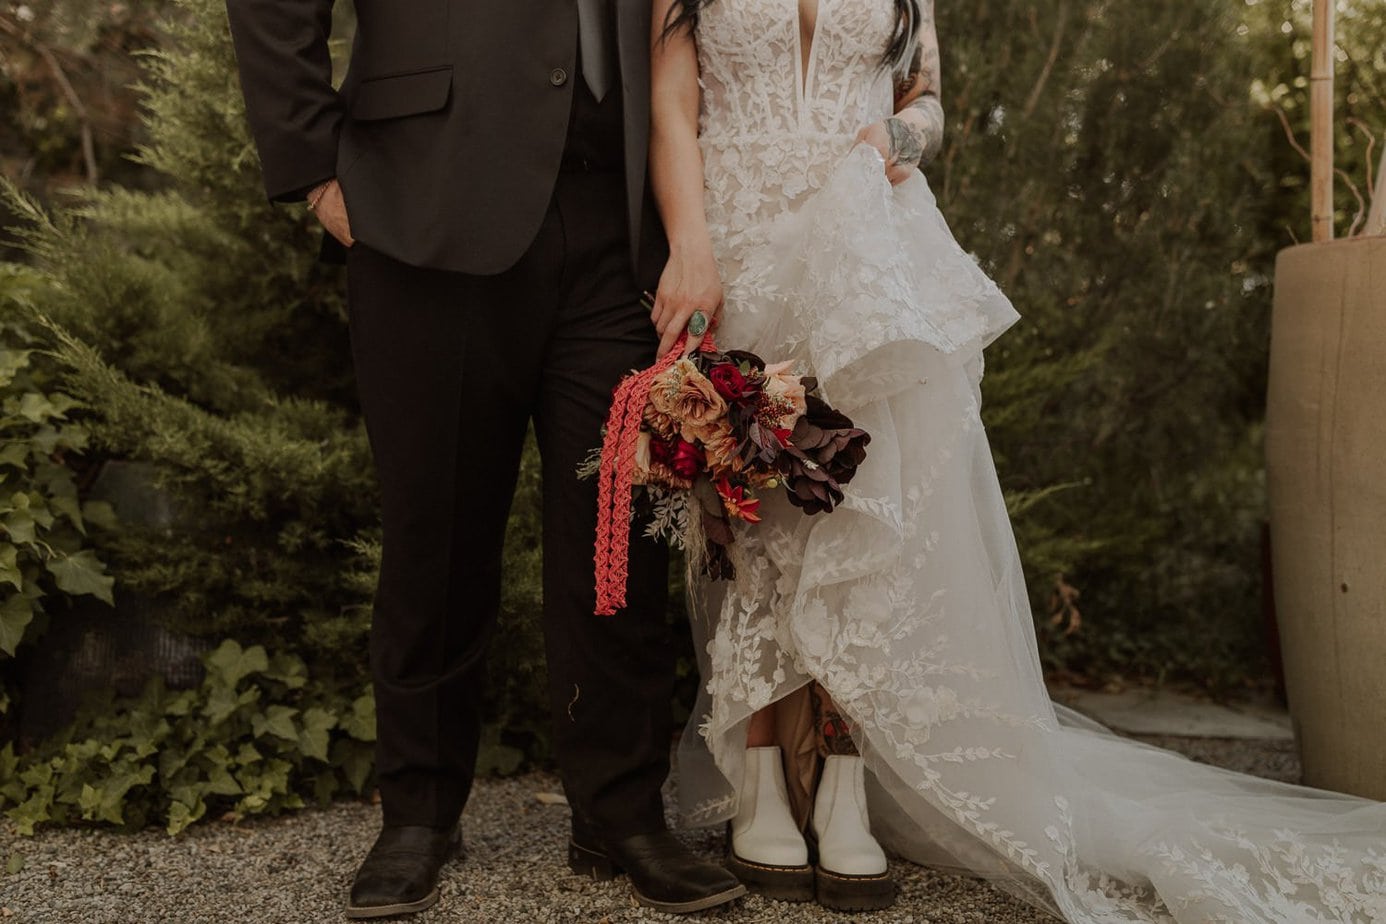 Bride and groom stand next to each other. Edgy bride shows off her Doc Martin boots for her wedding shoes and holds her bouquet by her side.